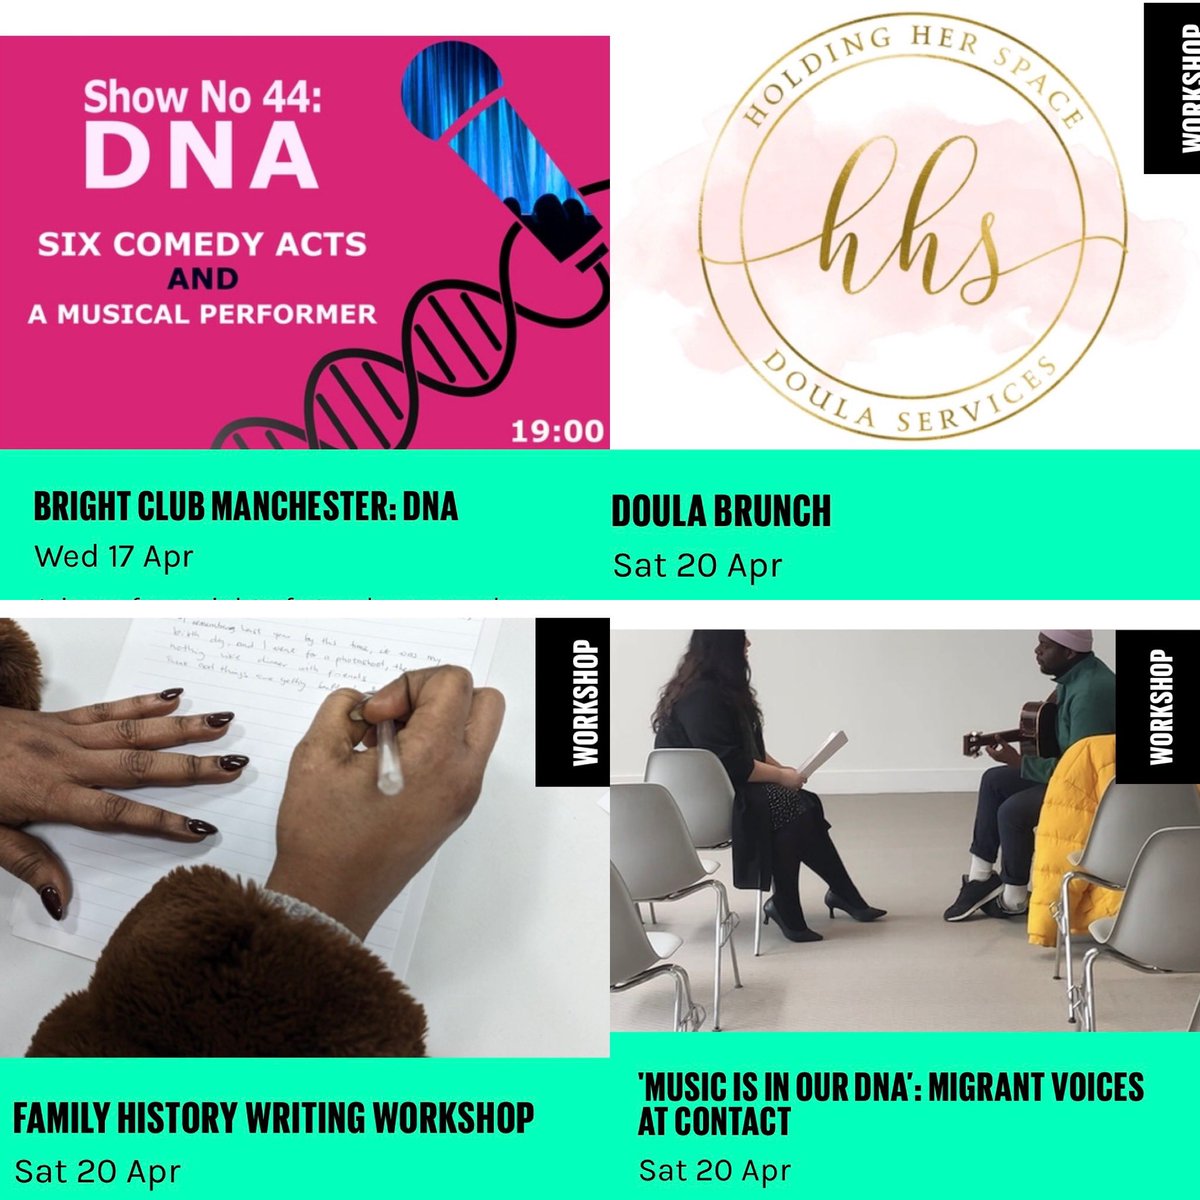 You’ll never catch me keeping it simple. We’ve got four supporting events for The Bell Curves. Comedy Show Doula Brunch Family History Poetry Workshop Music Concert